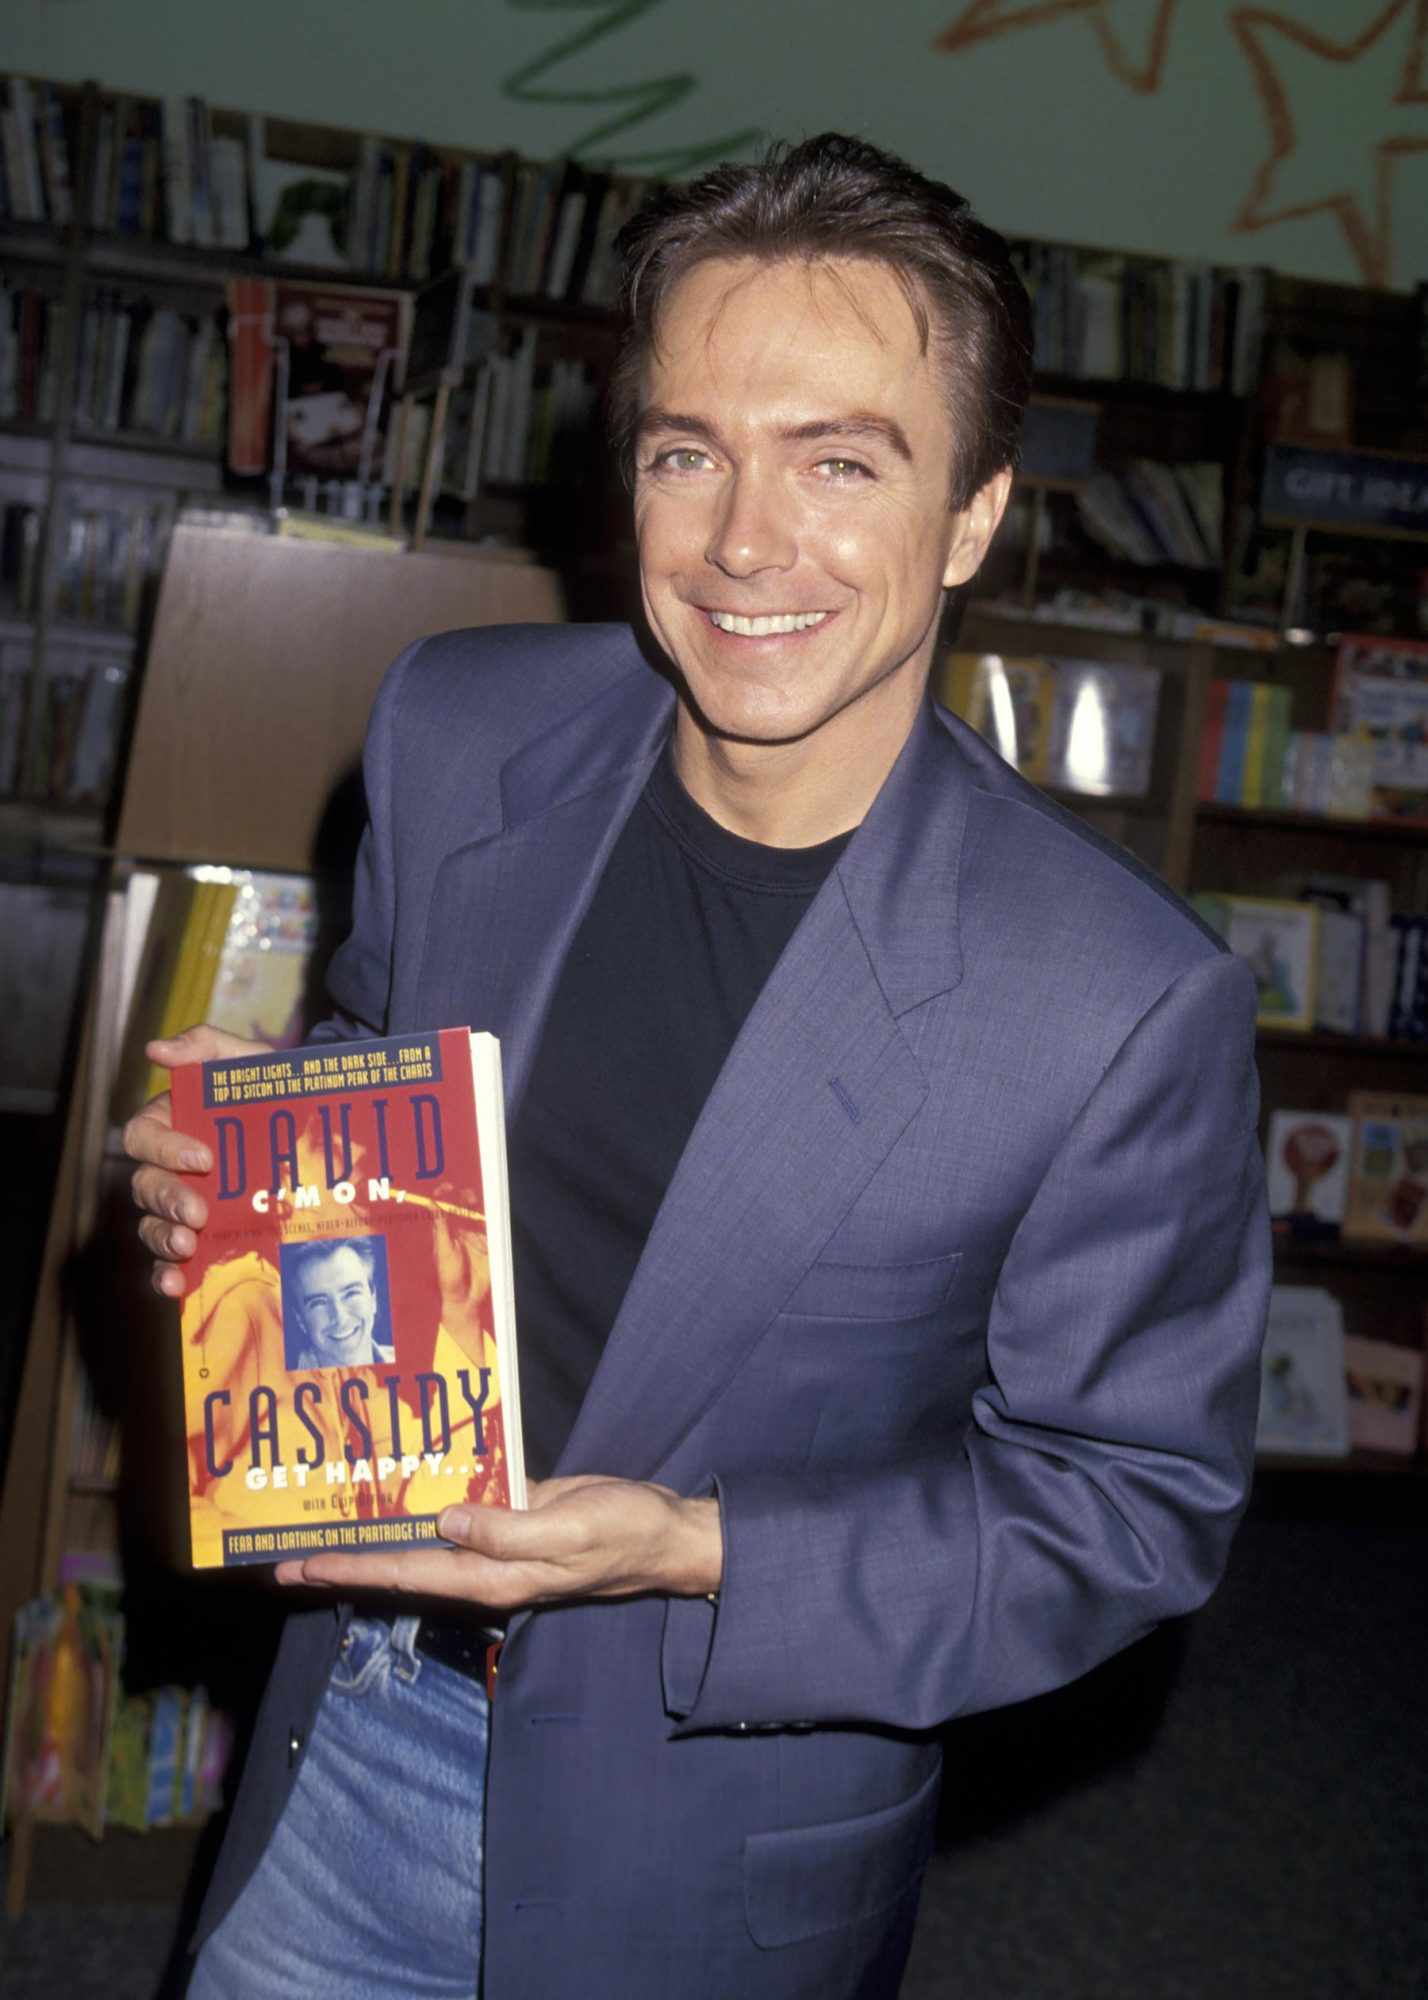 David Cassidy In Store Appearance To Promote New Book "C'mon Get Happy"